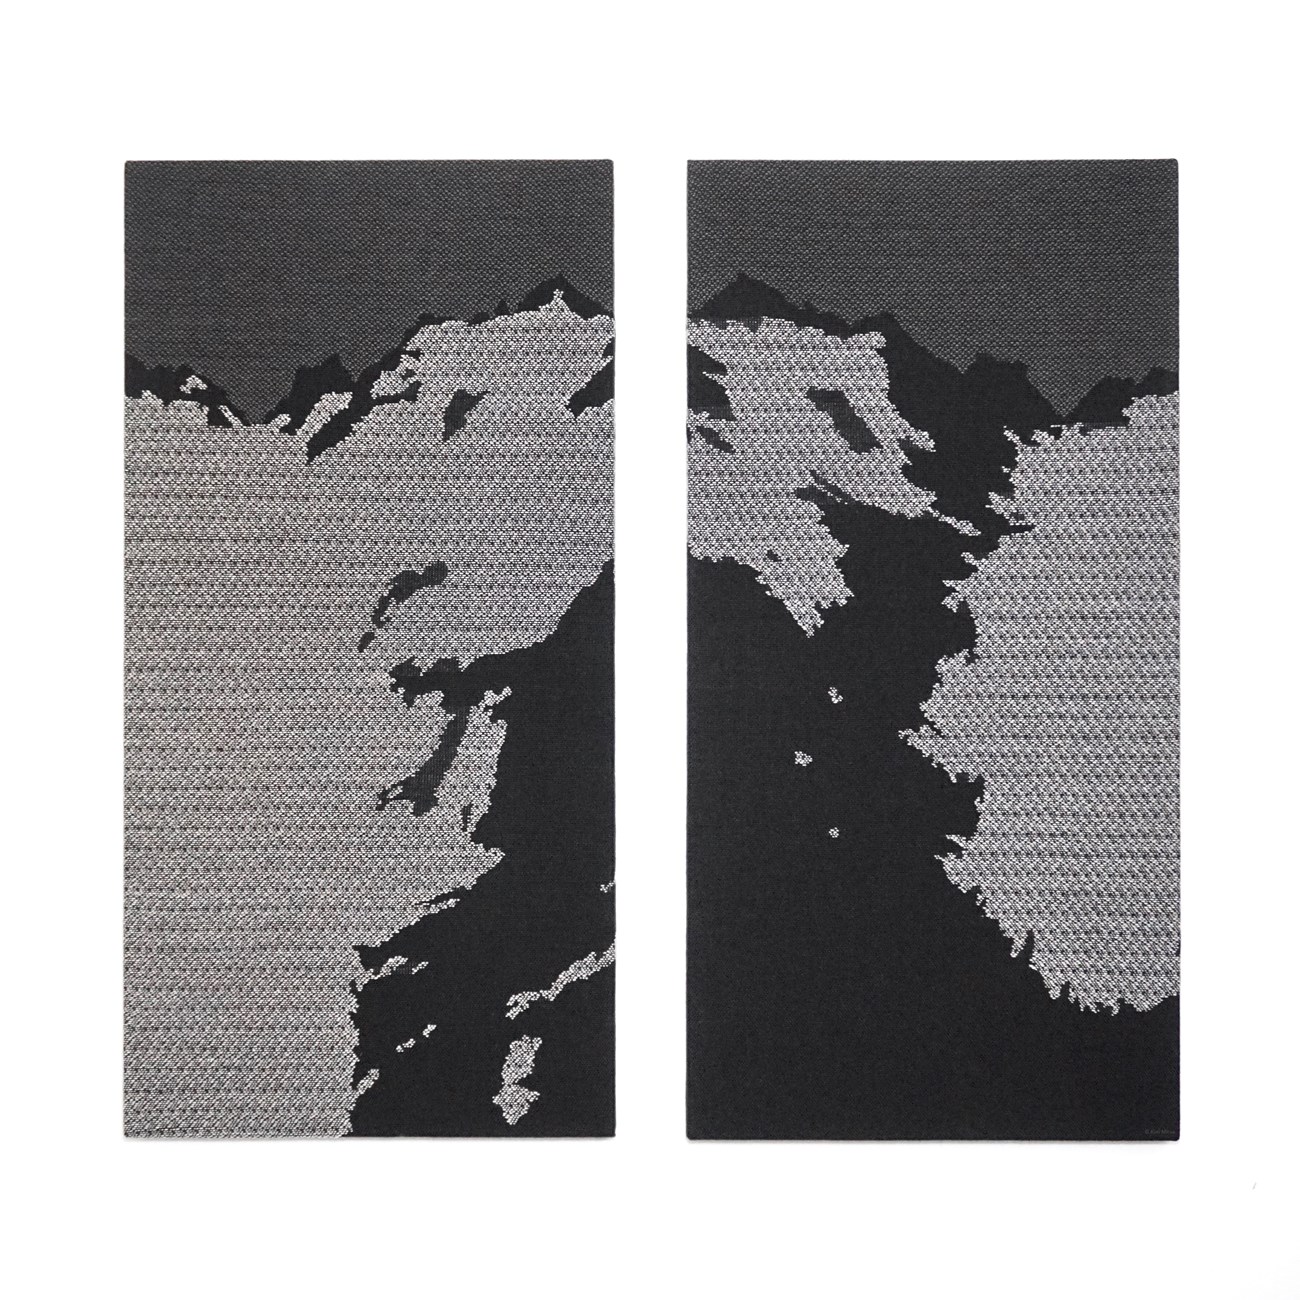 A woven tapestry in two panels forms the image of a mountain glacier in grayscale.